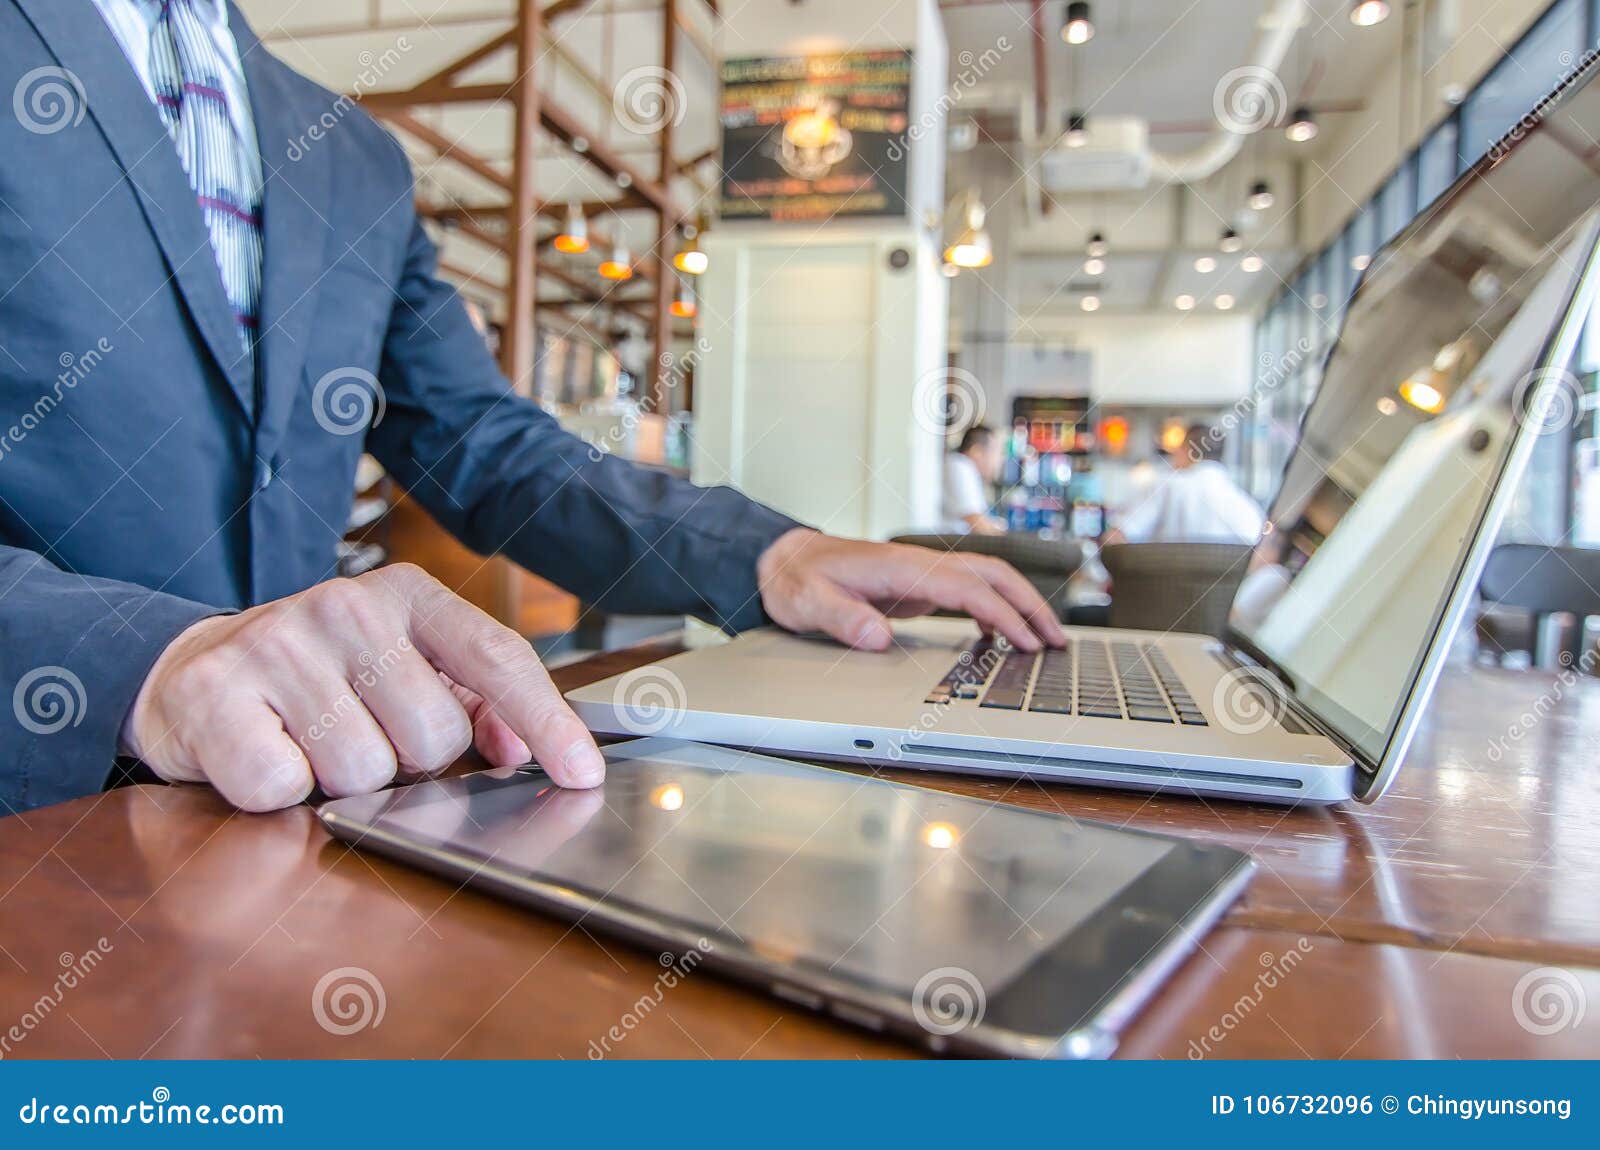 business man working using ipad while working with laptop